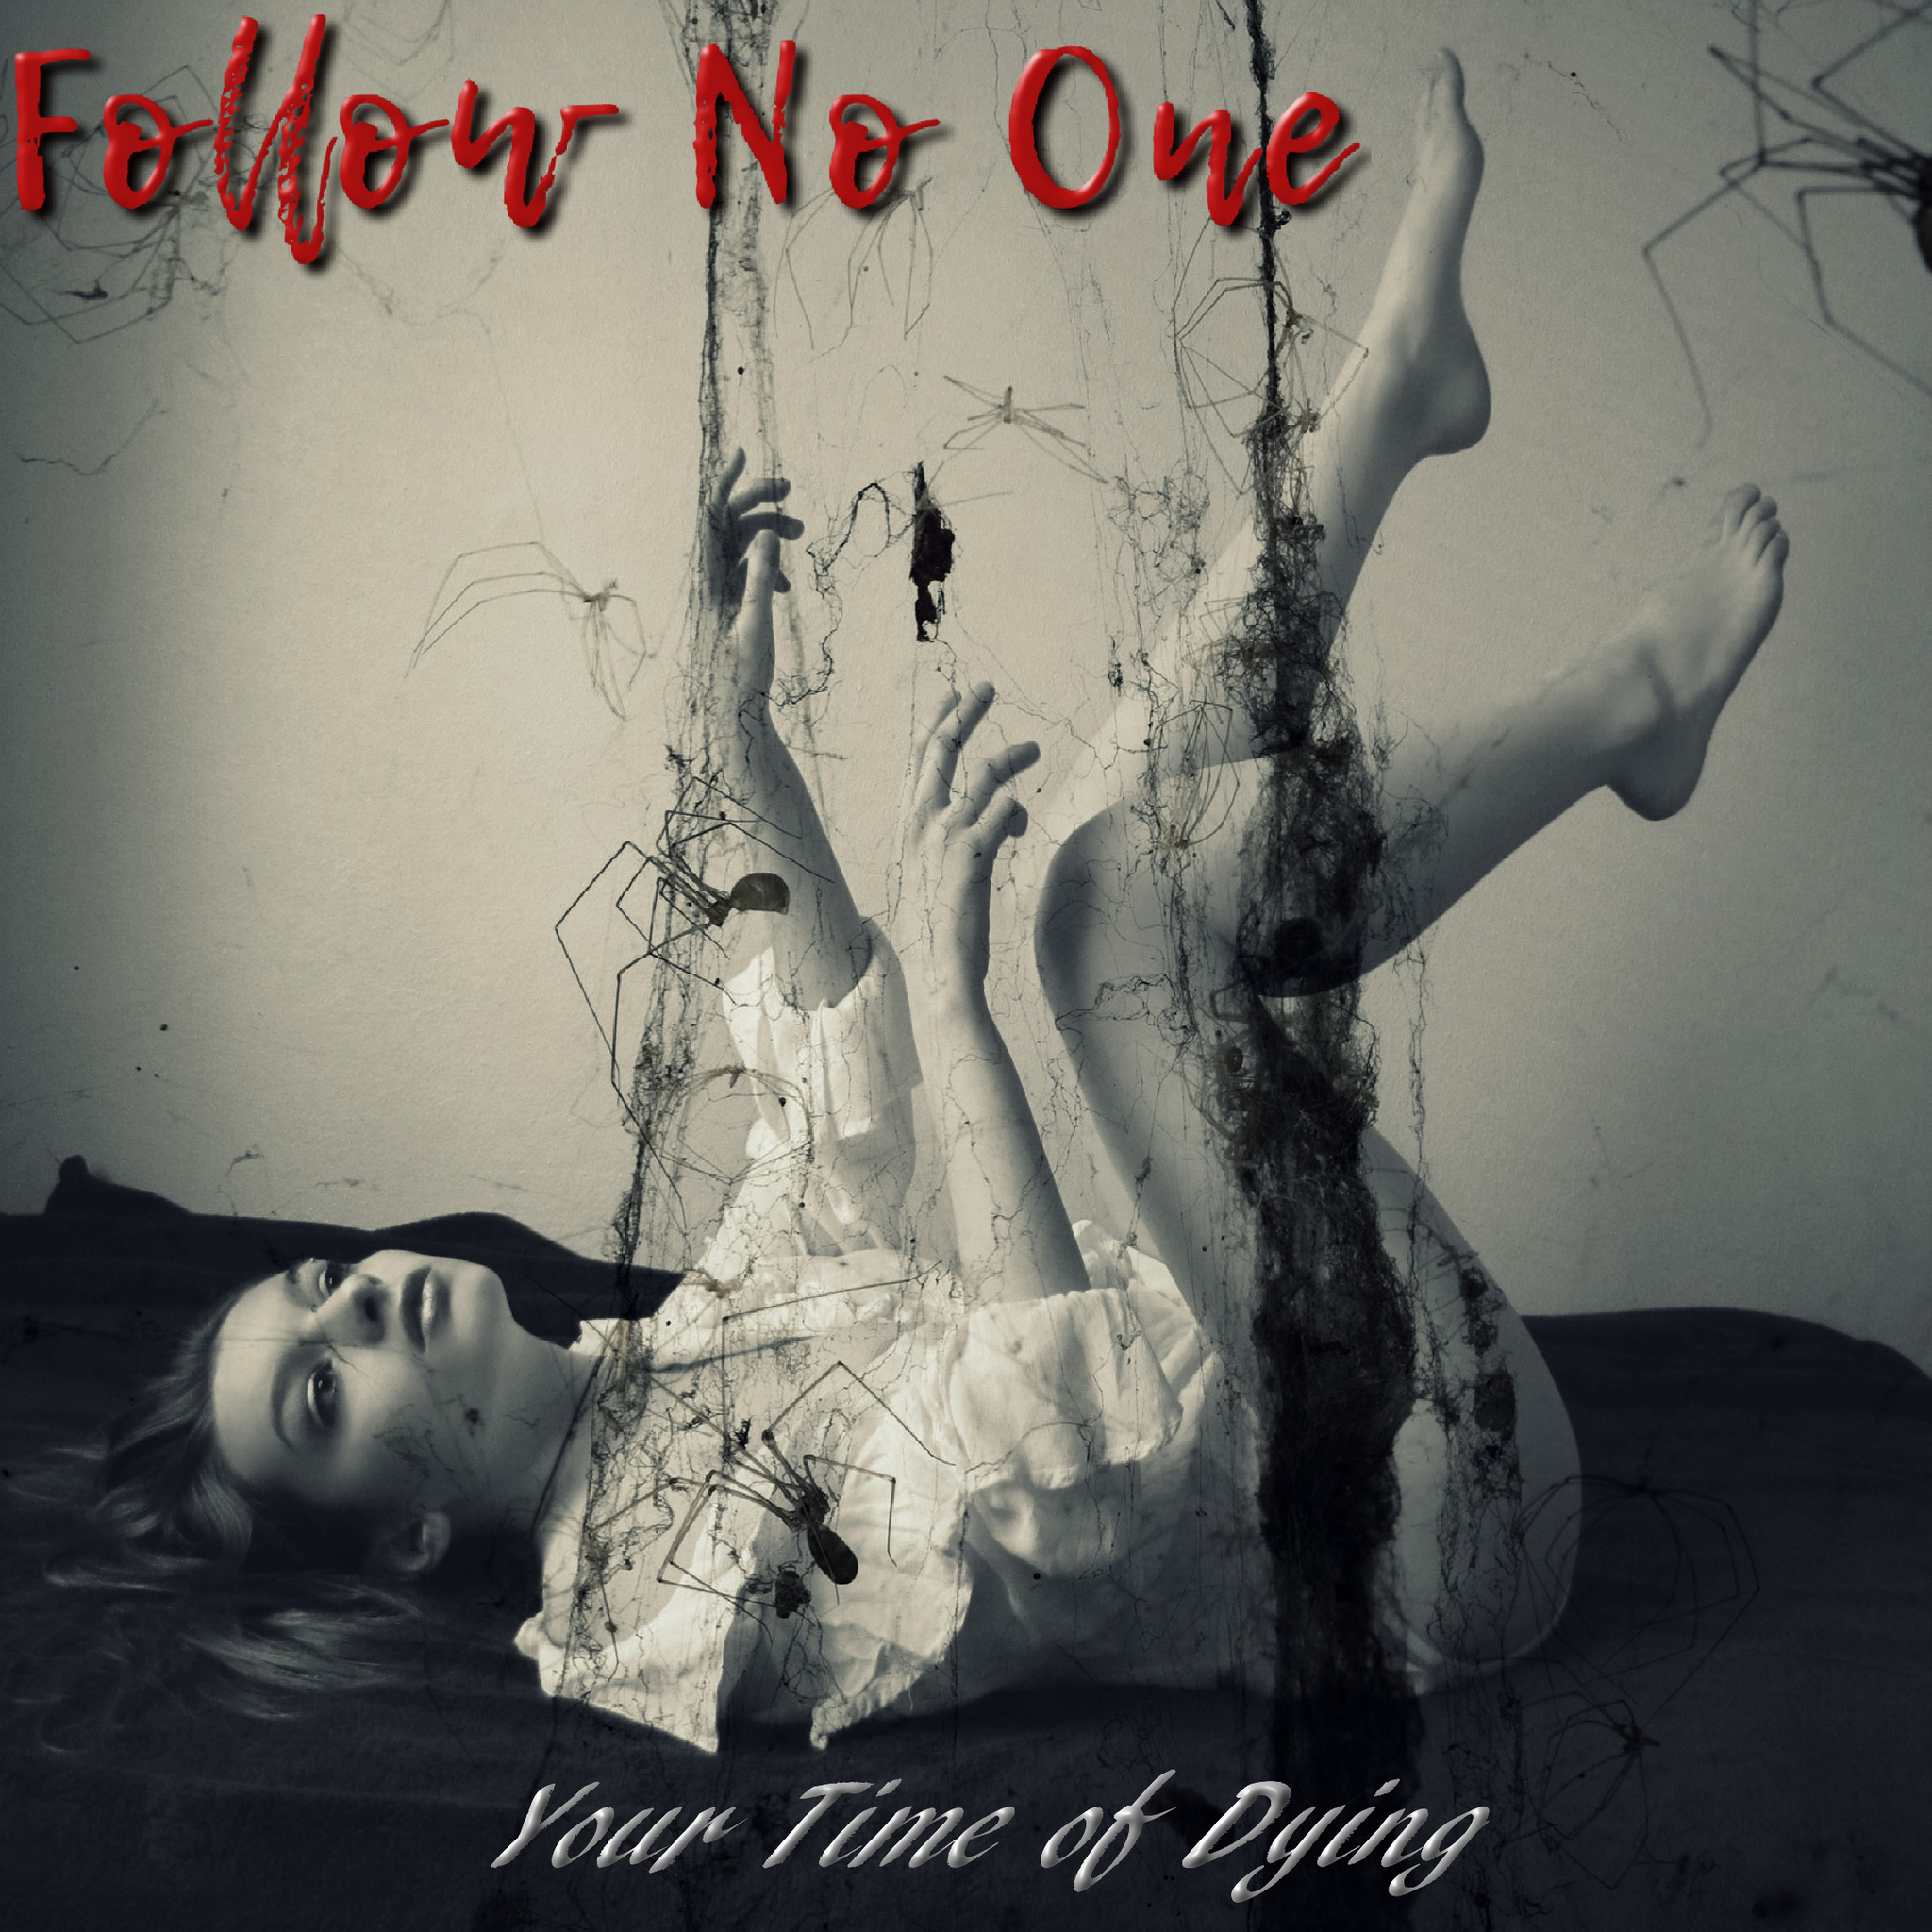 Your Time of Dying - Single (Digital Download) - FollowNooneStore